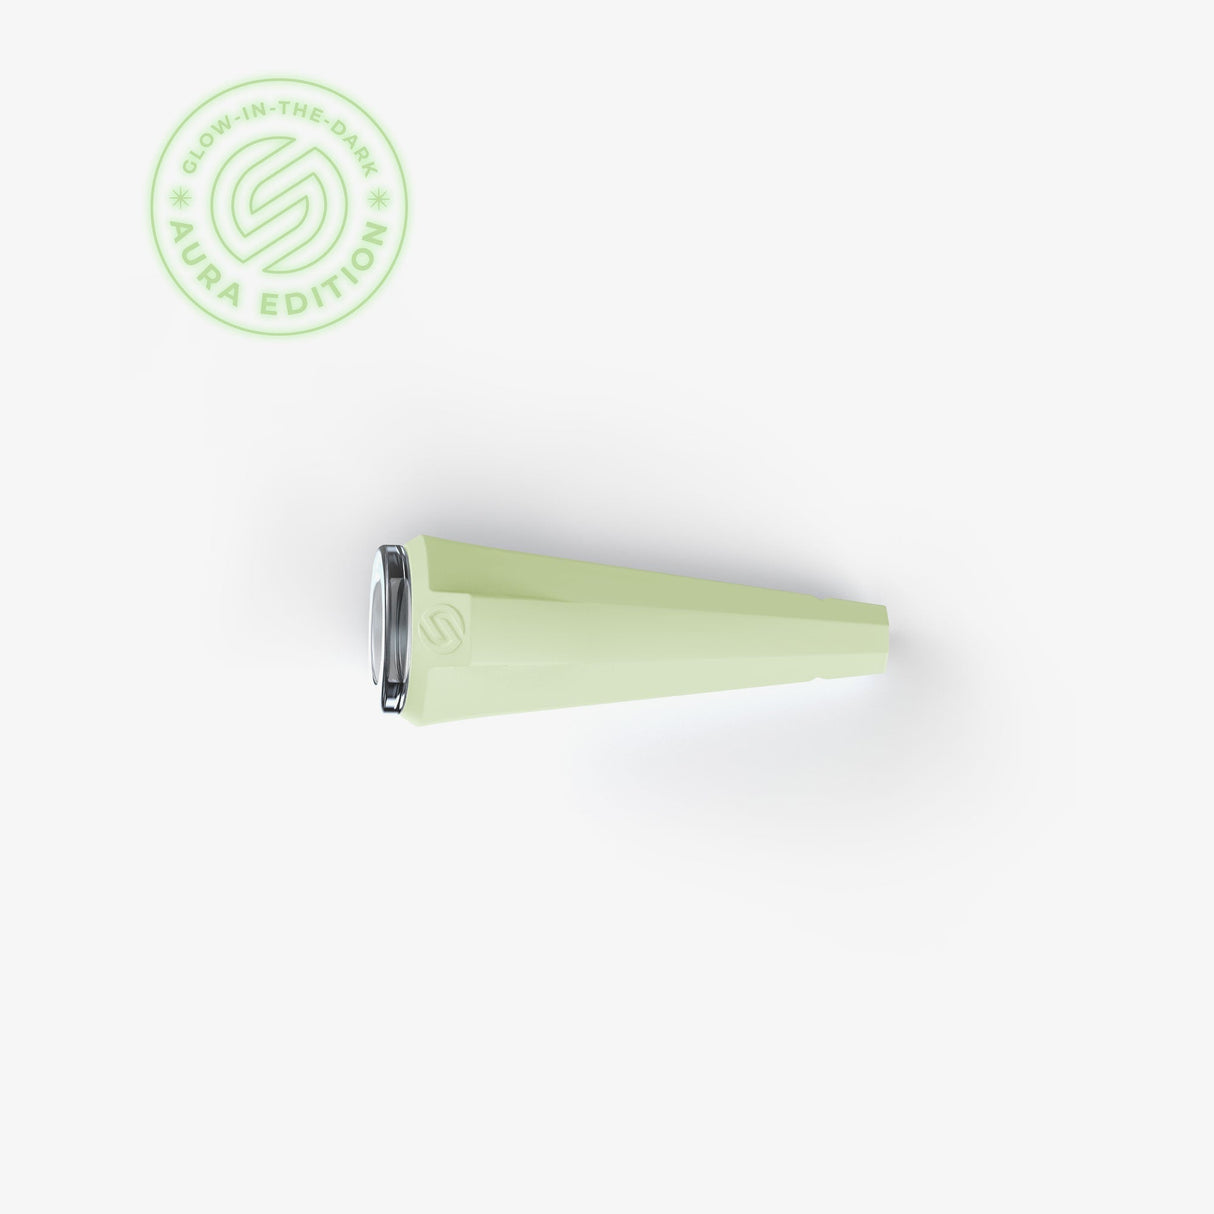 SOFTGLASS Glow-in-the-Dark Aura Pinch One Hitter with Silicone Cover